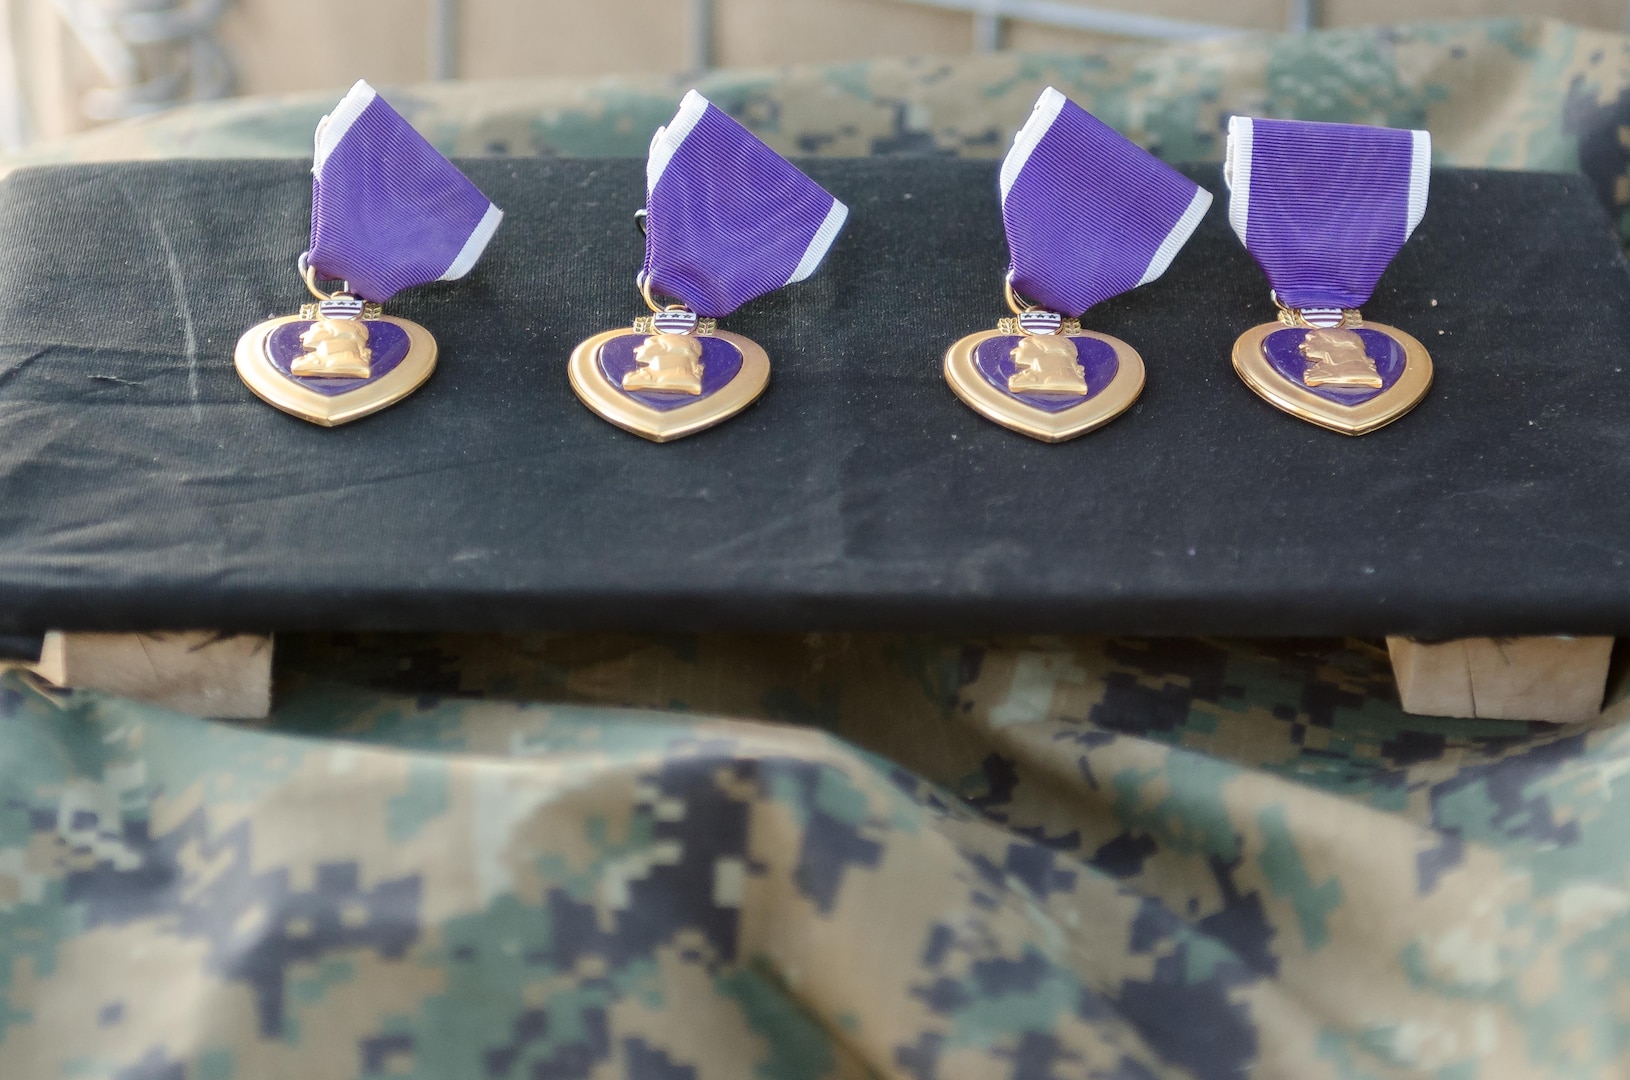 The Purple Heart was established by Gen. George Washington at Newburgh, New York, Aug. 7, 1782, during the Revolutionary War. It was reestablished by the President Herbert Hoover in 1932 and is now awarded in the name of the president to U.S. service members who are wounded or killed in combat. These four medals were presented to U.S. Marines Cpl. Adam J. Seanor, a native of Montgomery, Pennsylvania, Cpl.  William Crisostomosfelipe, a native of Orange, California, Lance Cpl. Eli Cisco, a native of Mingo, West Virginia and Lance Cpl. Javier A. Suarezmontalvo, a native of Orange, Florida,  during a ceremony at Kara Soar Base, Makhmur, Iraq, April 22, 2016. The Marines, all field artillery cannon crewmen assigned to Battery E, 26th Marine Expeditionary Unit, were awarded their Purple Hearts at the very site they were wounded. (U.S. Army Photo by Staff Sgt. Peter J. Berardi)